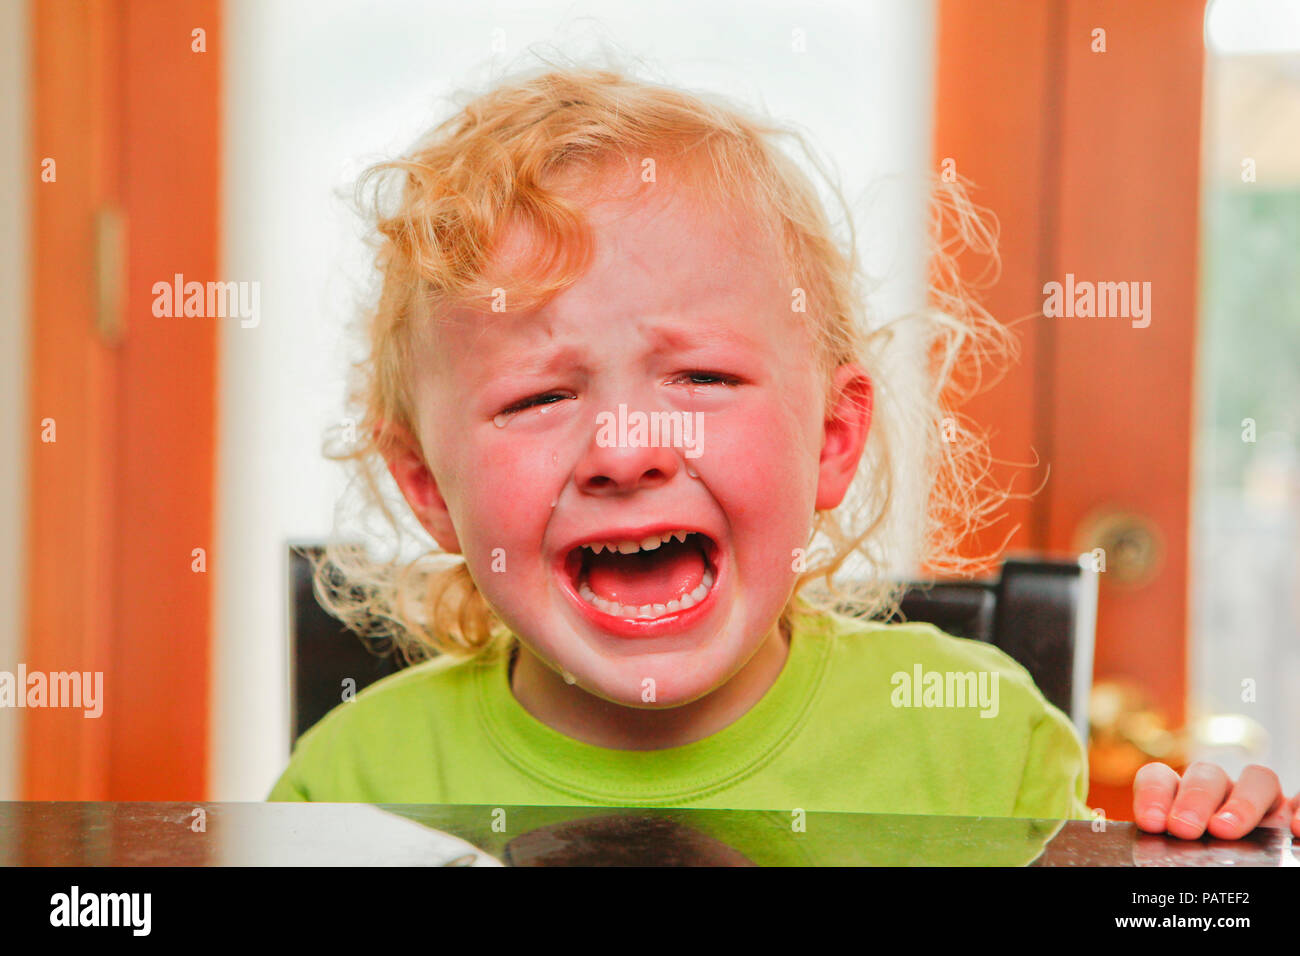 Child crying with impatience Stock Photo